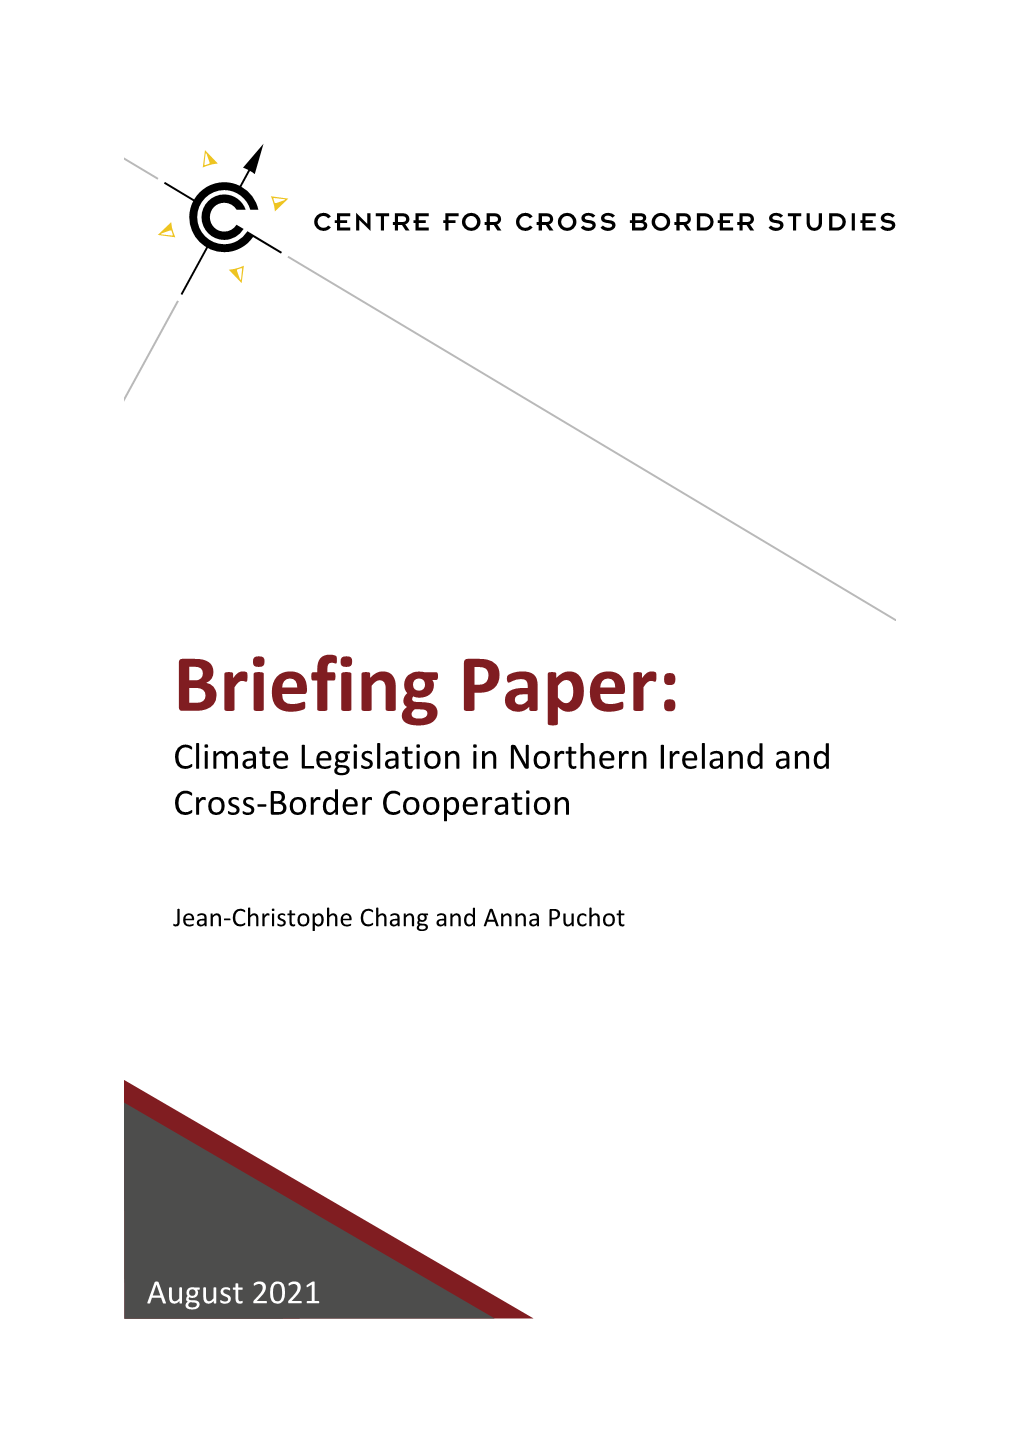 Briefing Paper: Climate Legislation in Northern Ireland and Cross-Border Cooperation